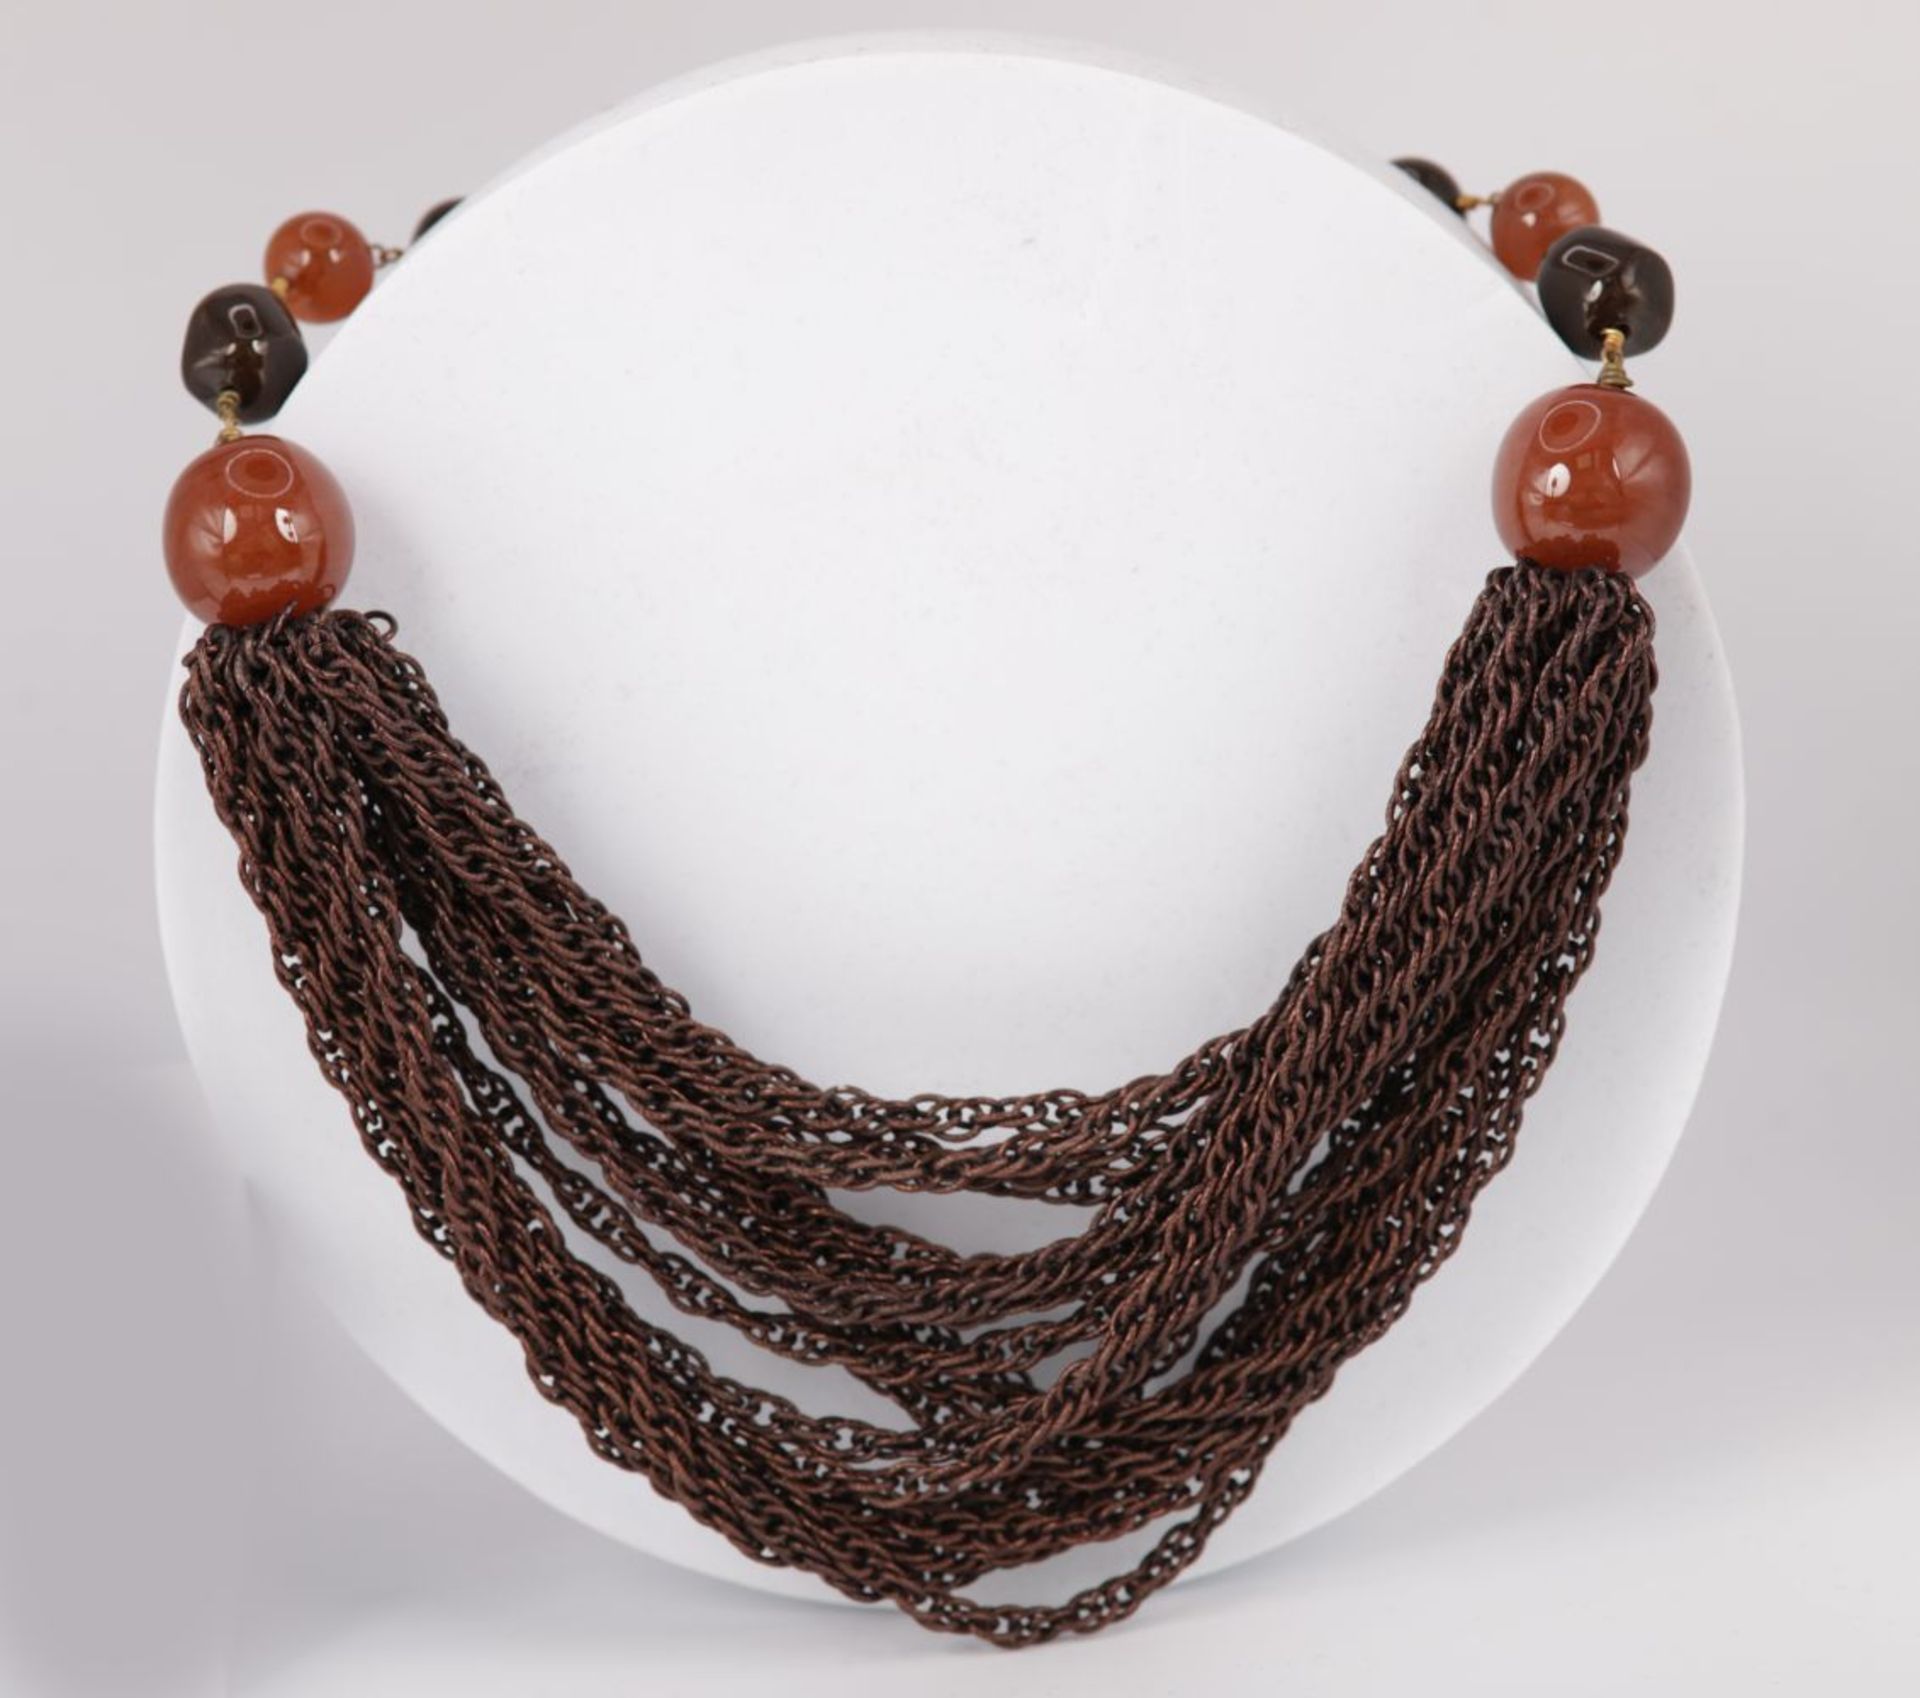 NECKLACE MADE OF MULTIPLE COPPER CHAINS - Image 2 of 2